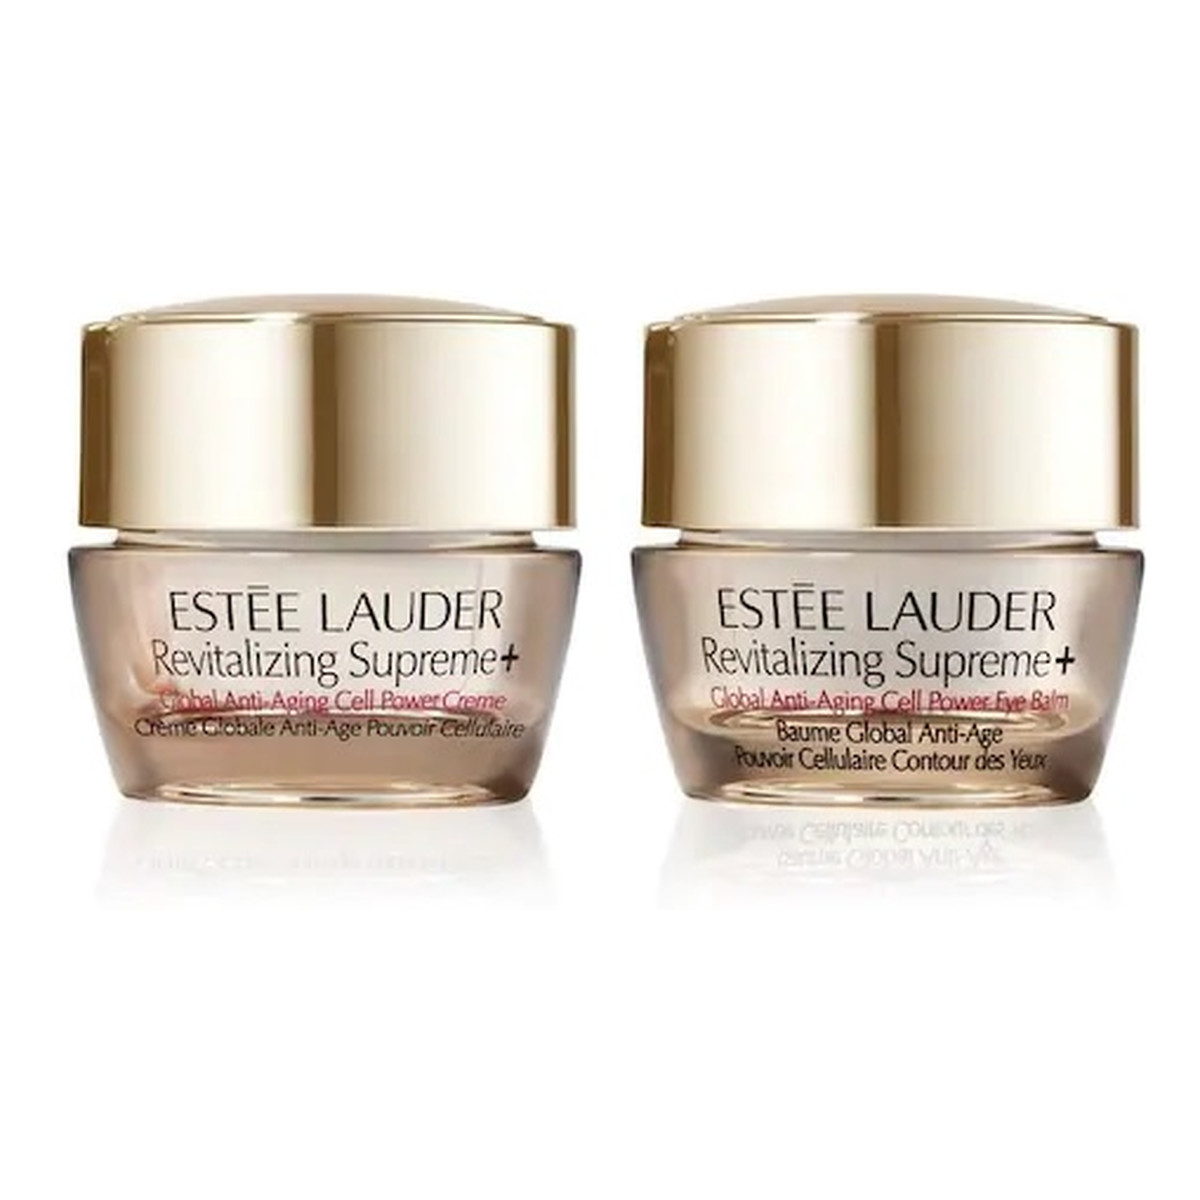 Estee Lauder Youth Power: Firm + Lift + Hydrate zestaw Revitalizing Supreme+ Global Anti-Aging Cell Power Creme 7ml + Revitalizing Supreme+ Global Anti-Aging Cell Power Eye Balm